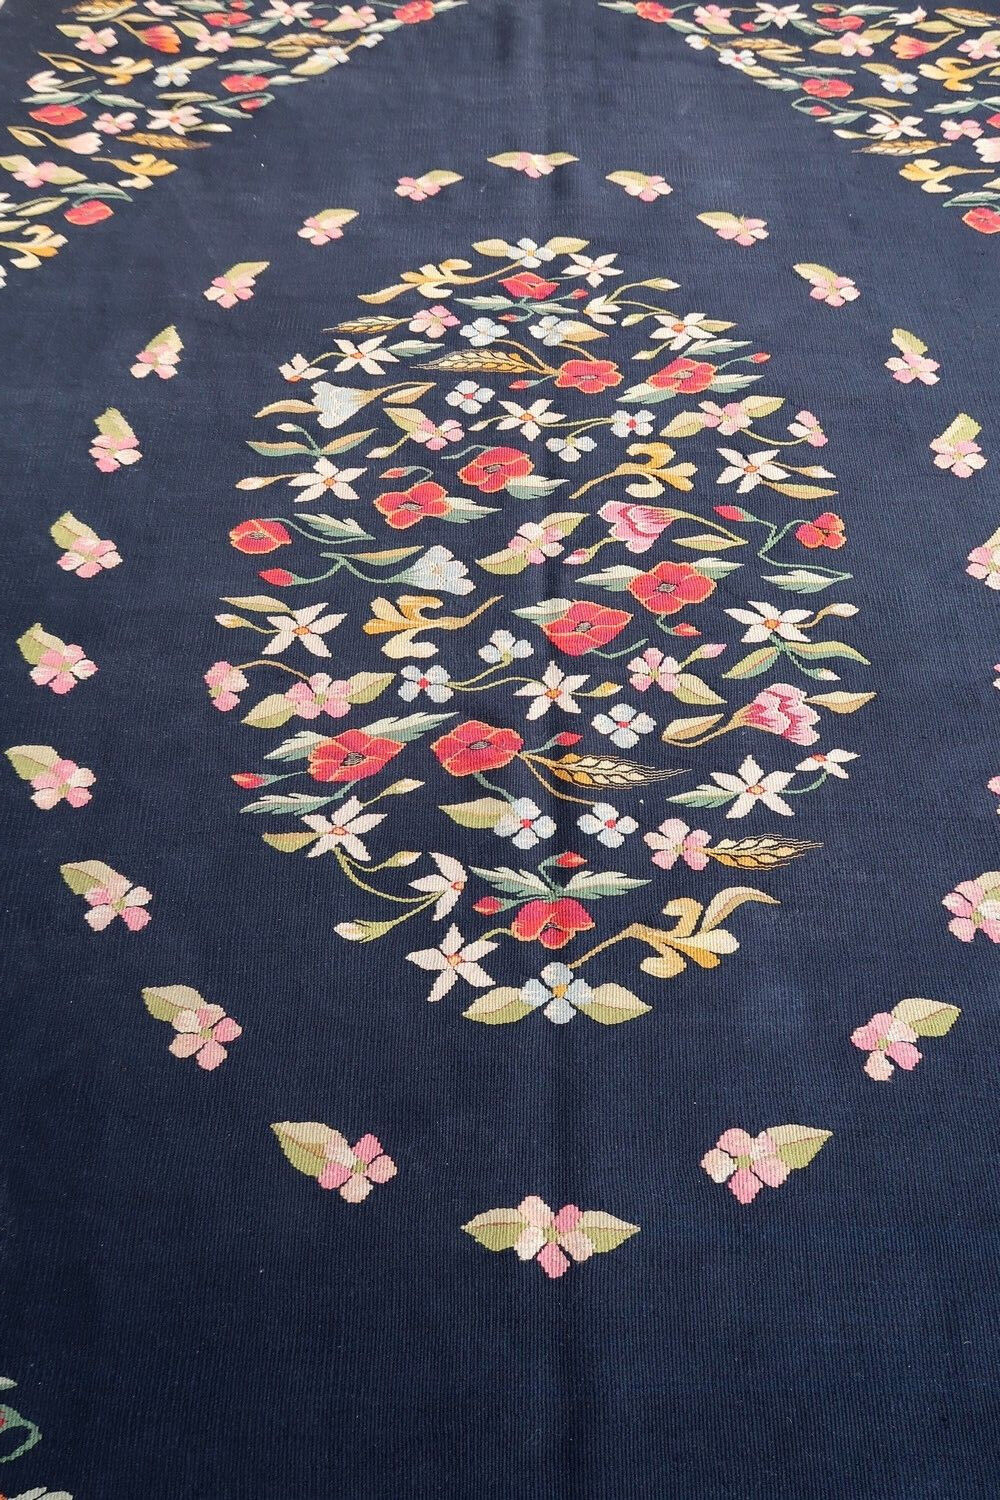 Handmade vintage kilim in black color and floral design from Romania. This Bessarabian rug is in original good condition, made in wool. The rug is from the middle of 20th century.